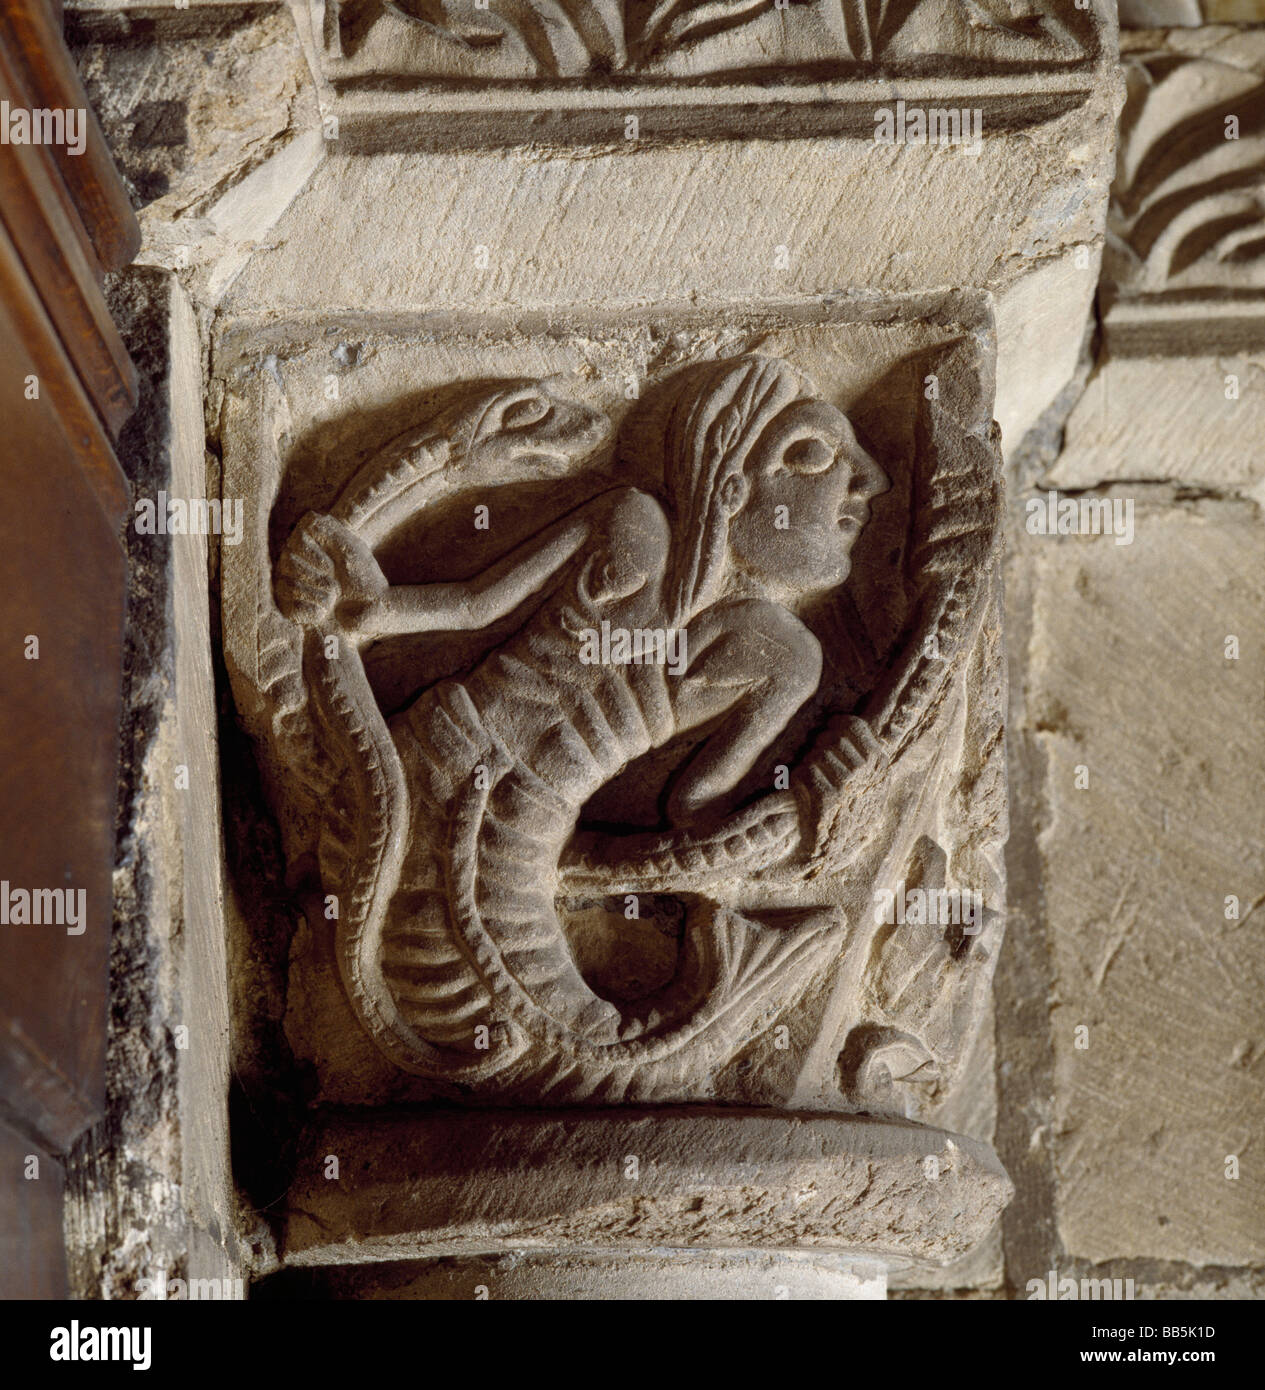 Durham Cathedral Chapter House doorway, carved capital late 12thc showing mermaid with serpent Stock Photo